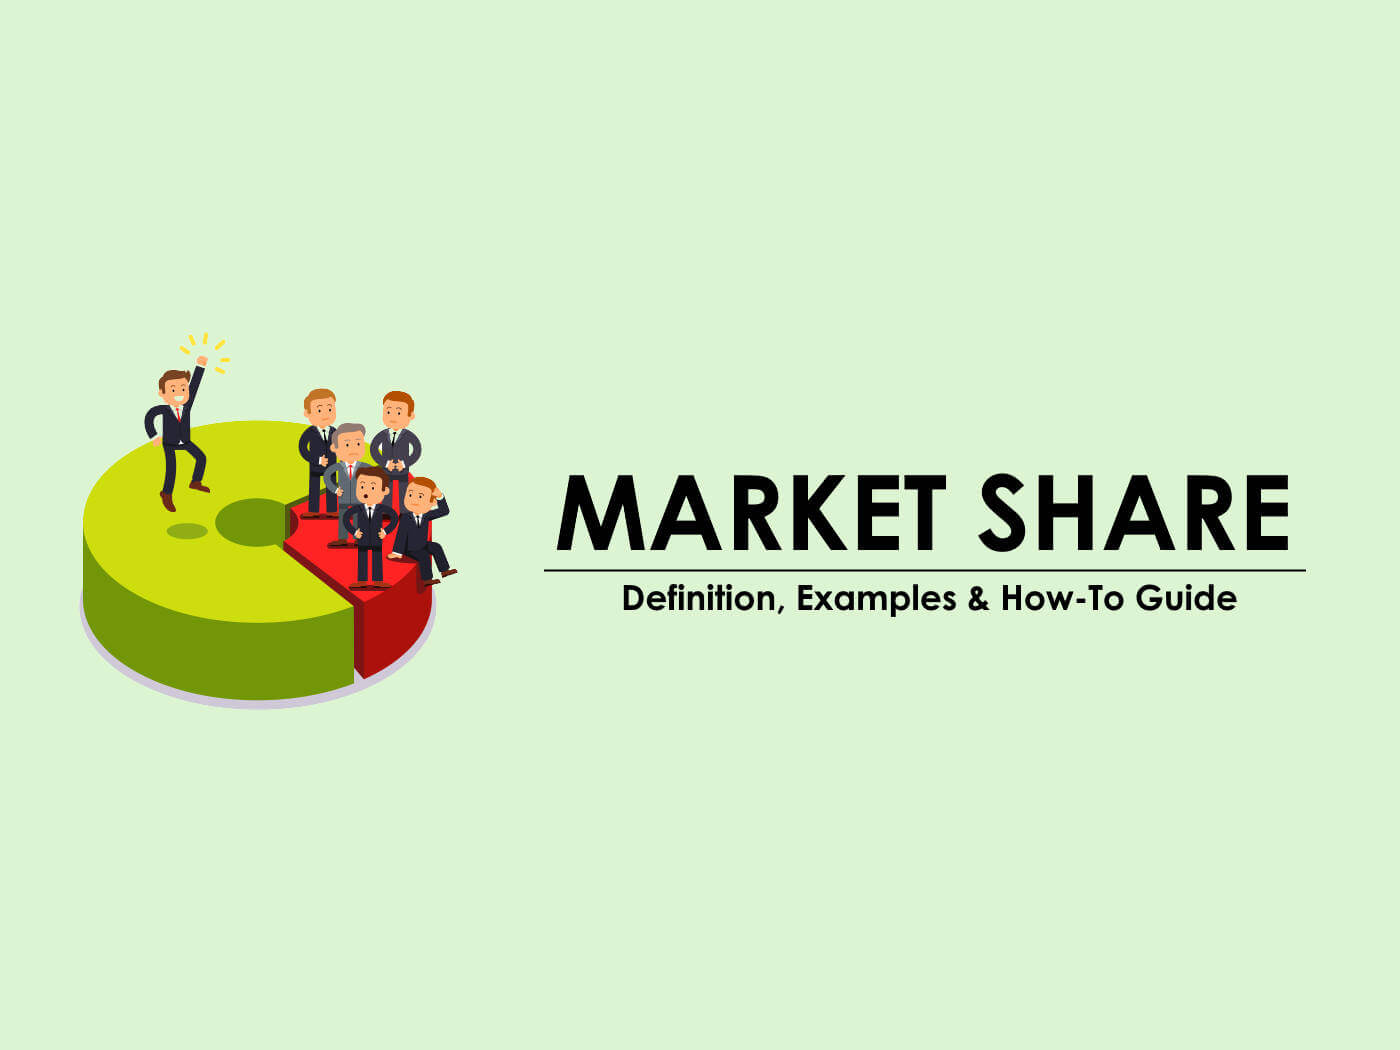 Market Share - Definition, Calculation, Examples & How-To Increase It